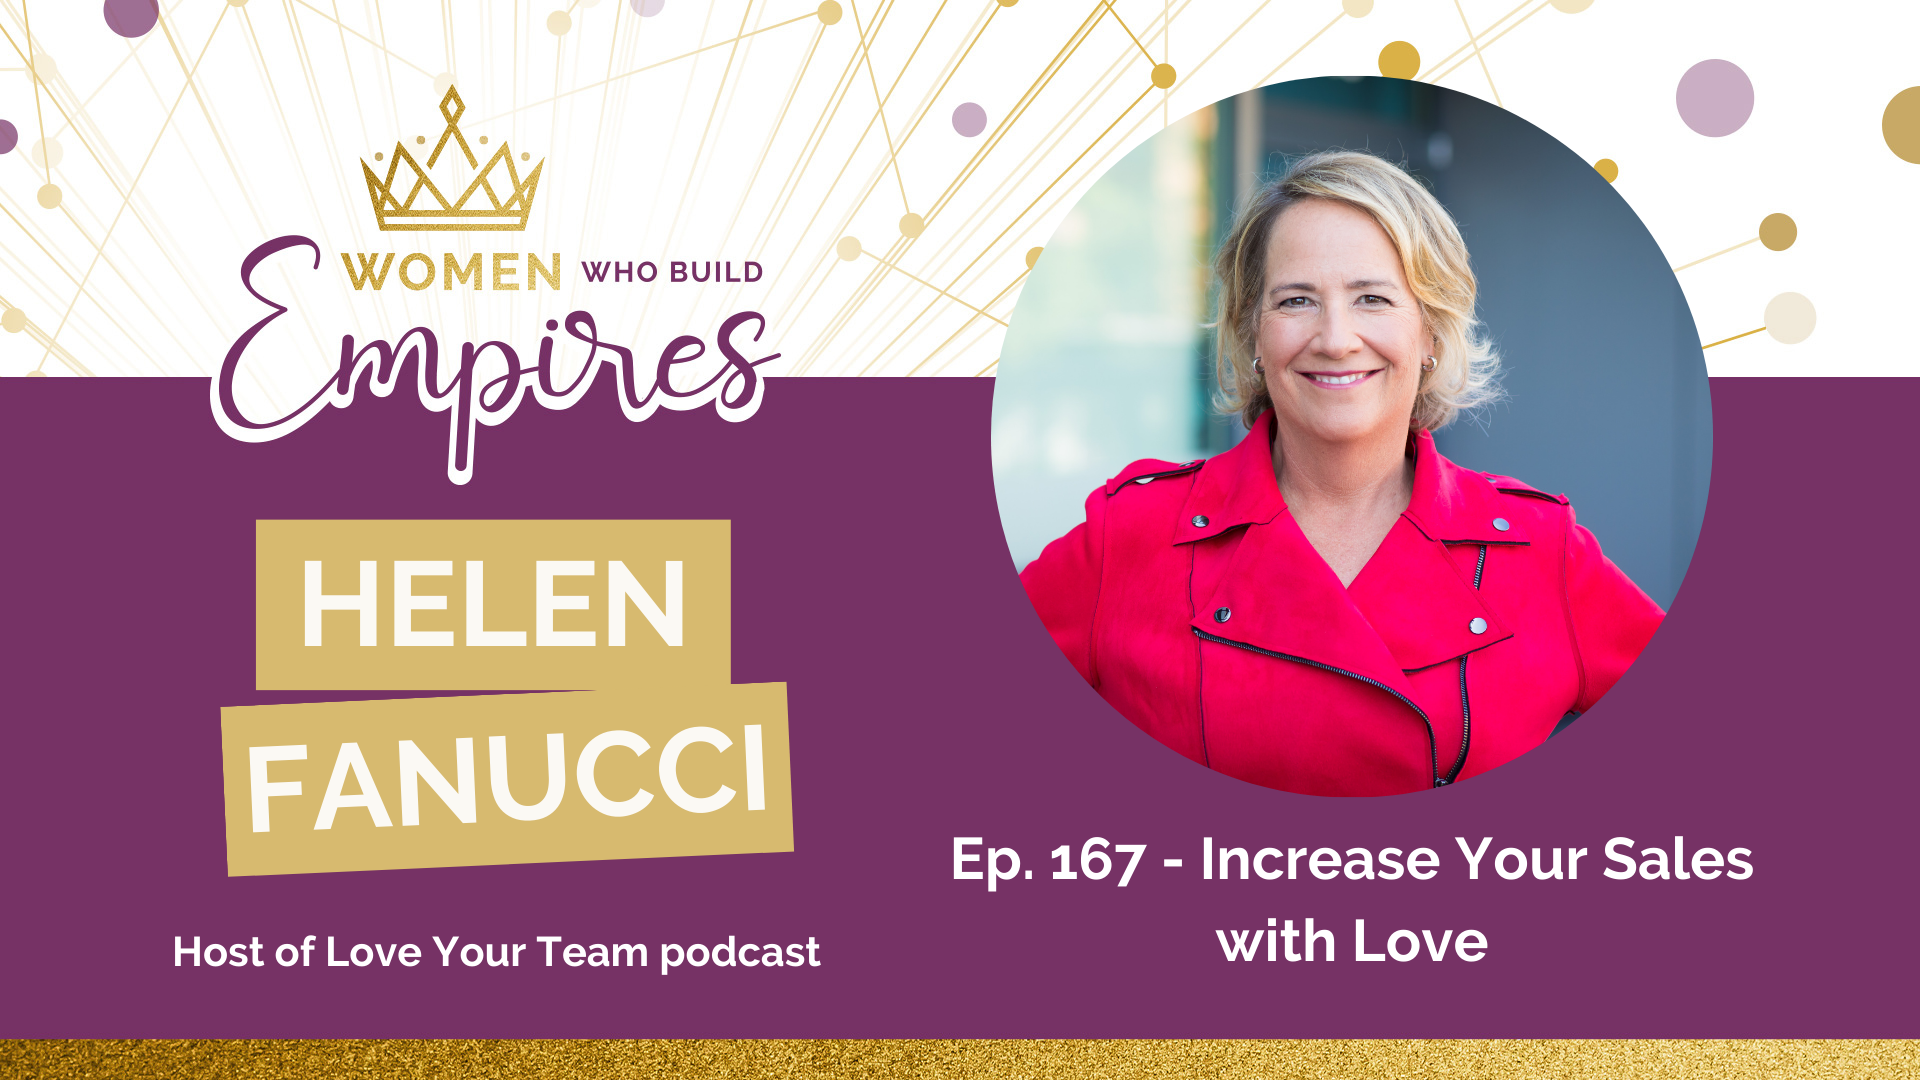 Ep. 168 – Increase Your Sales with Love w/ Helen Fanucci